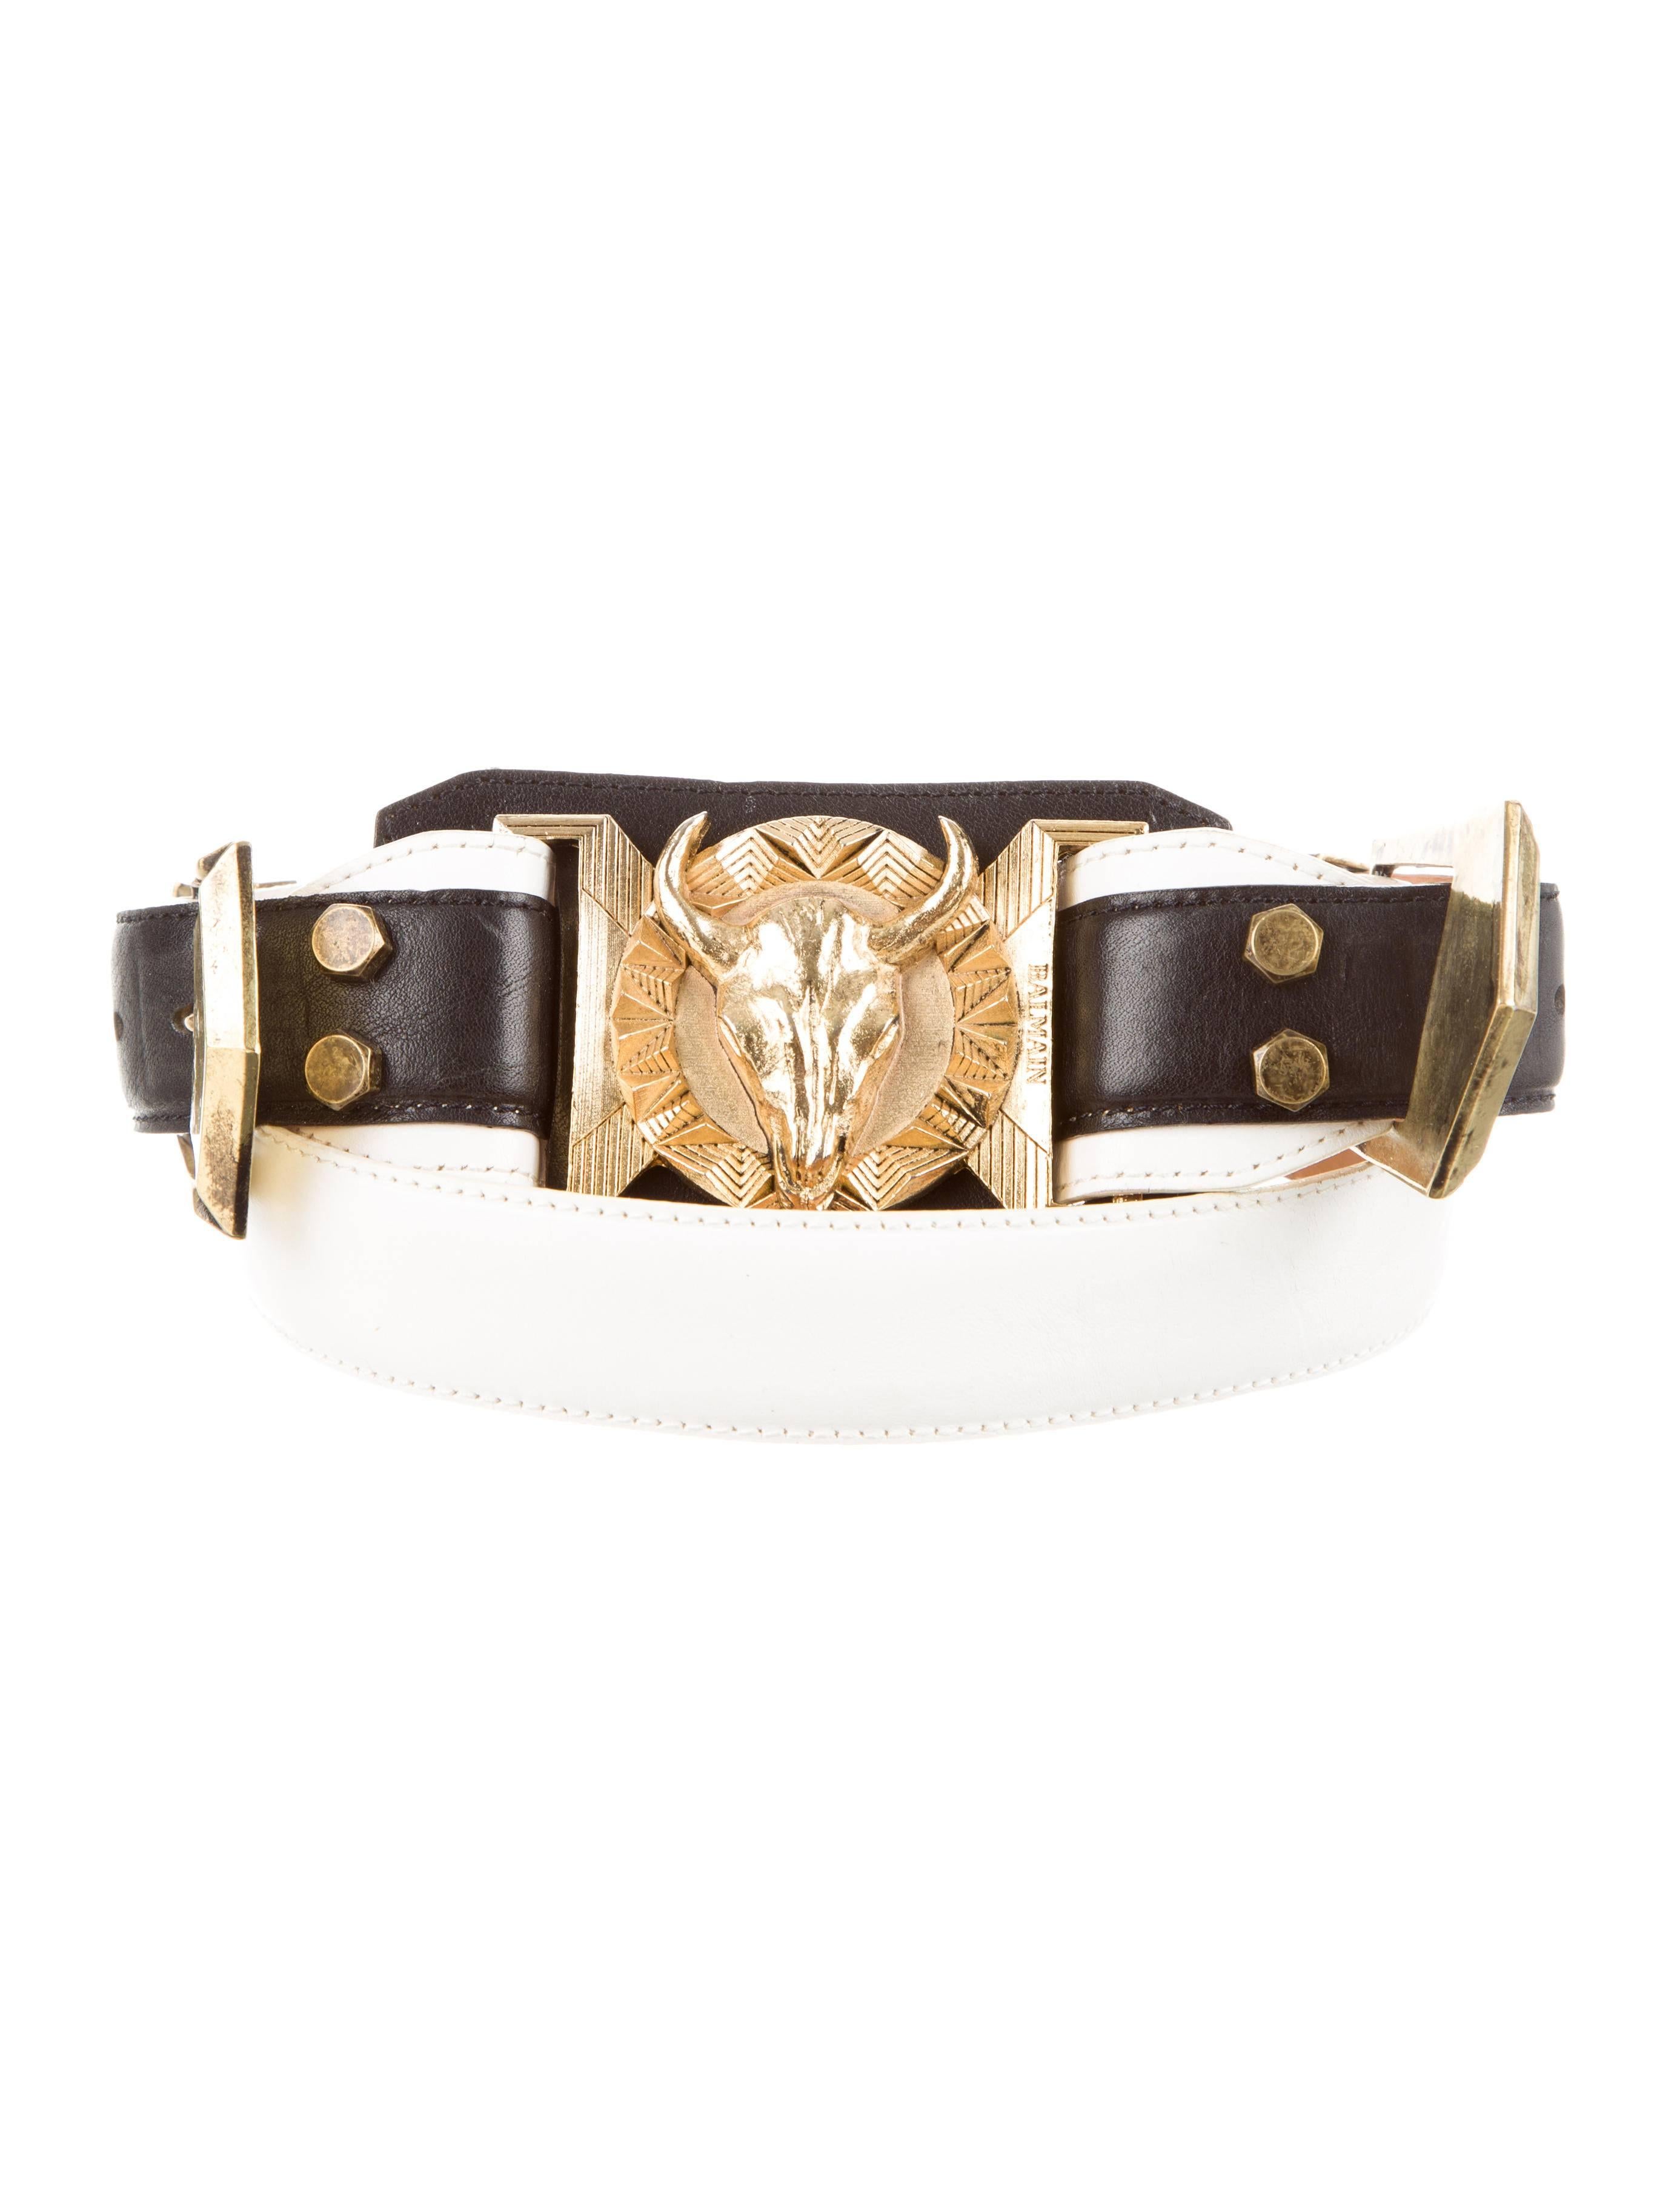 CURATOR'S NOTES

Leather 
Gold tone 
Brasstone hardware 
Buckle closure
Width 2.5